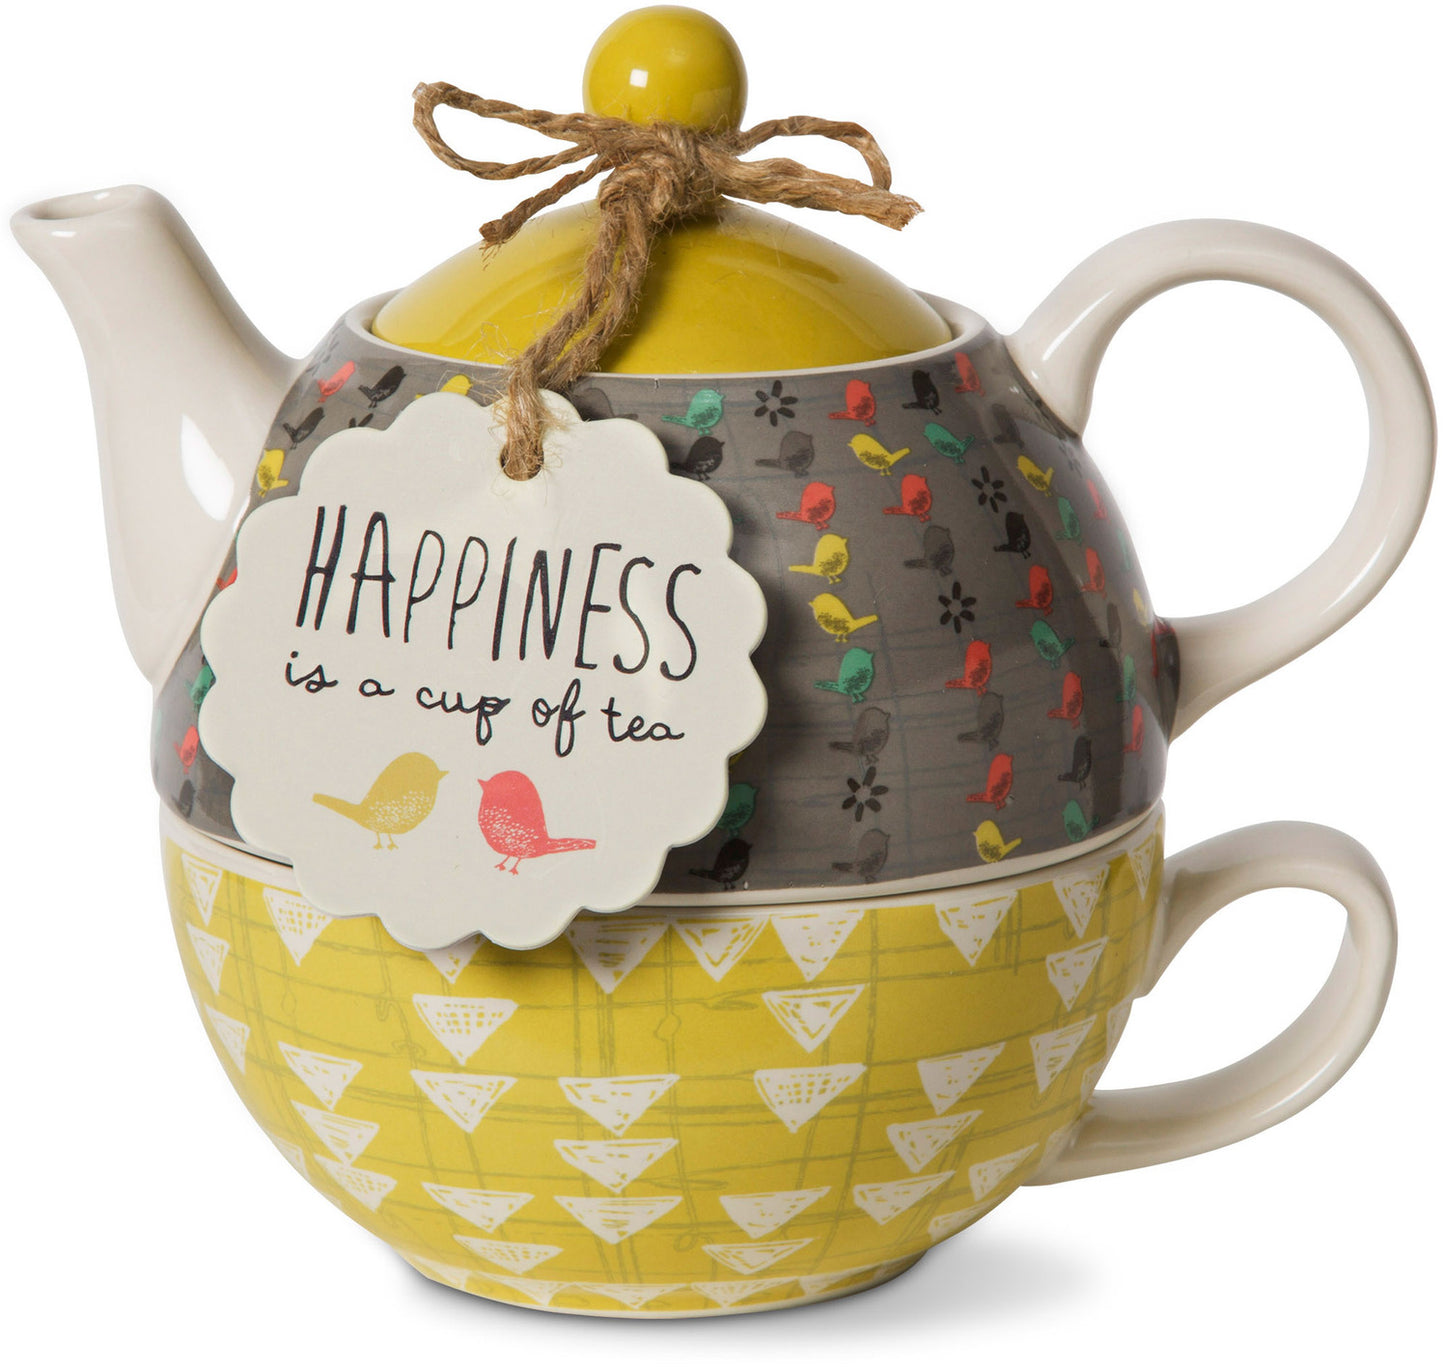 Happiness Time for Tea - 15 oz. Teapot & 8 oz Cup